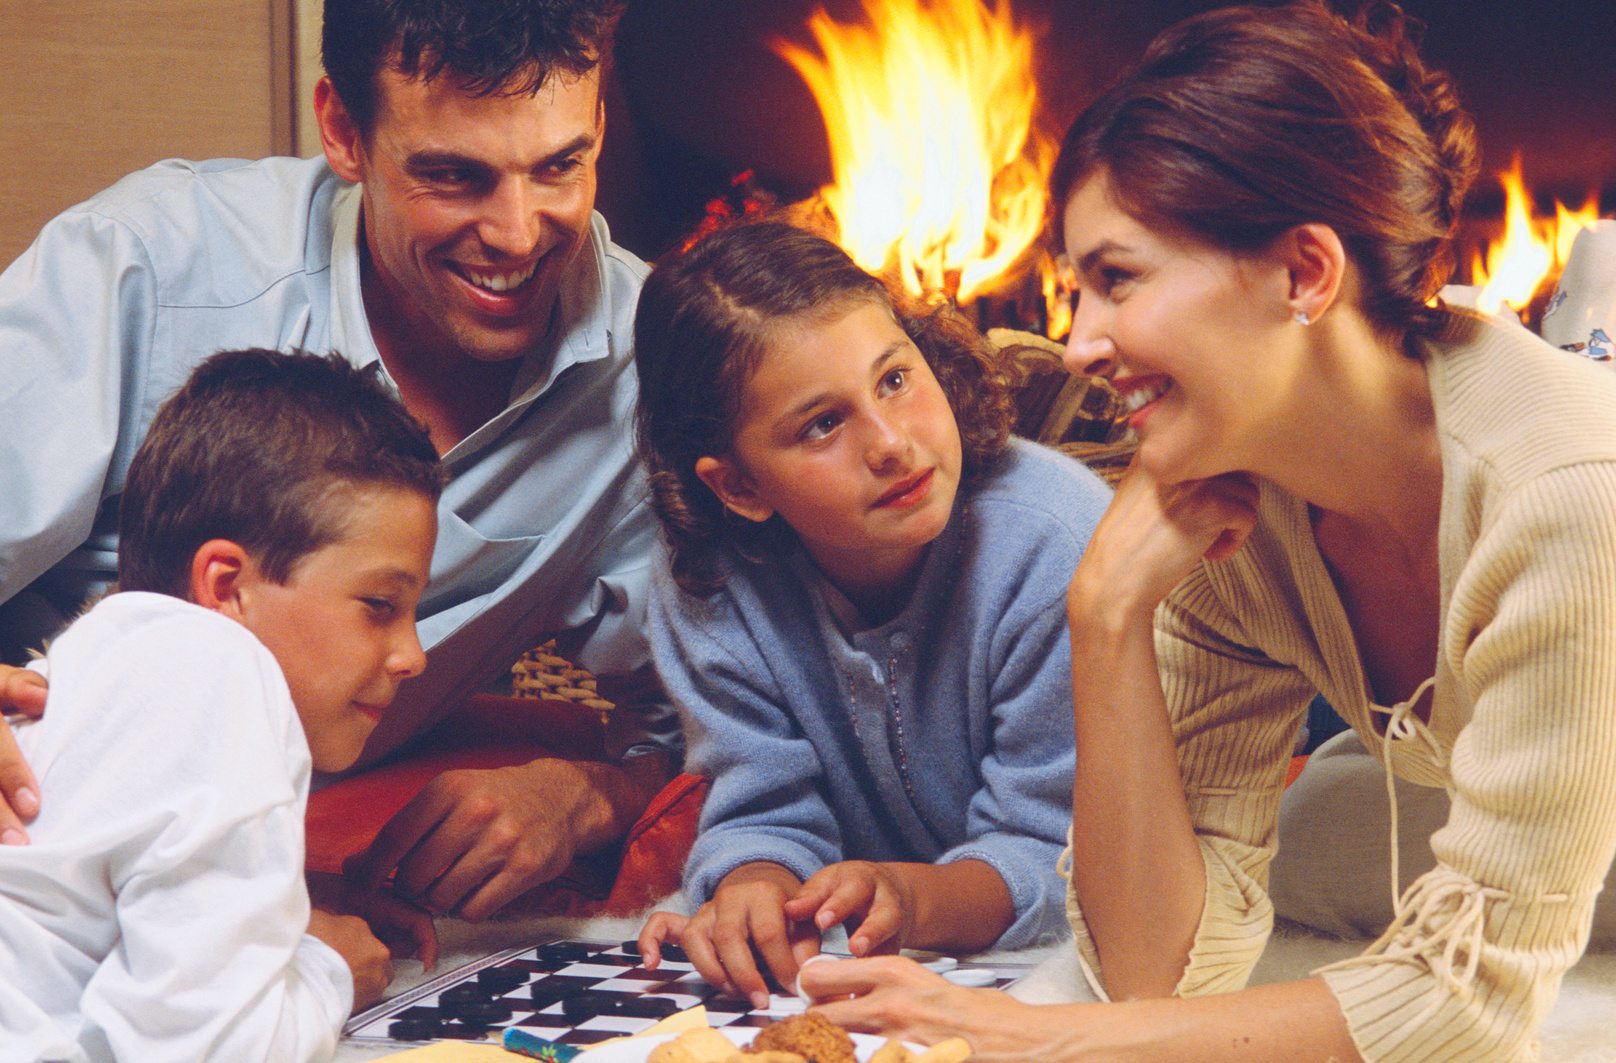 Family game night by fireplace